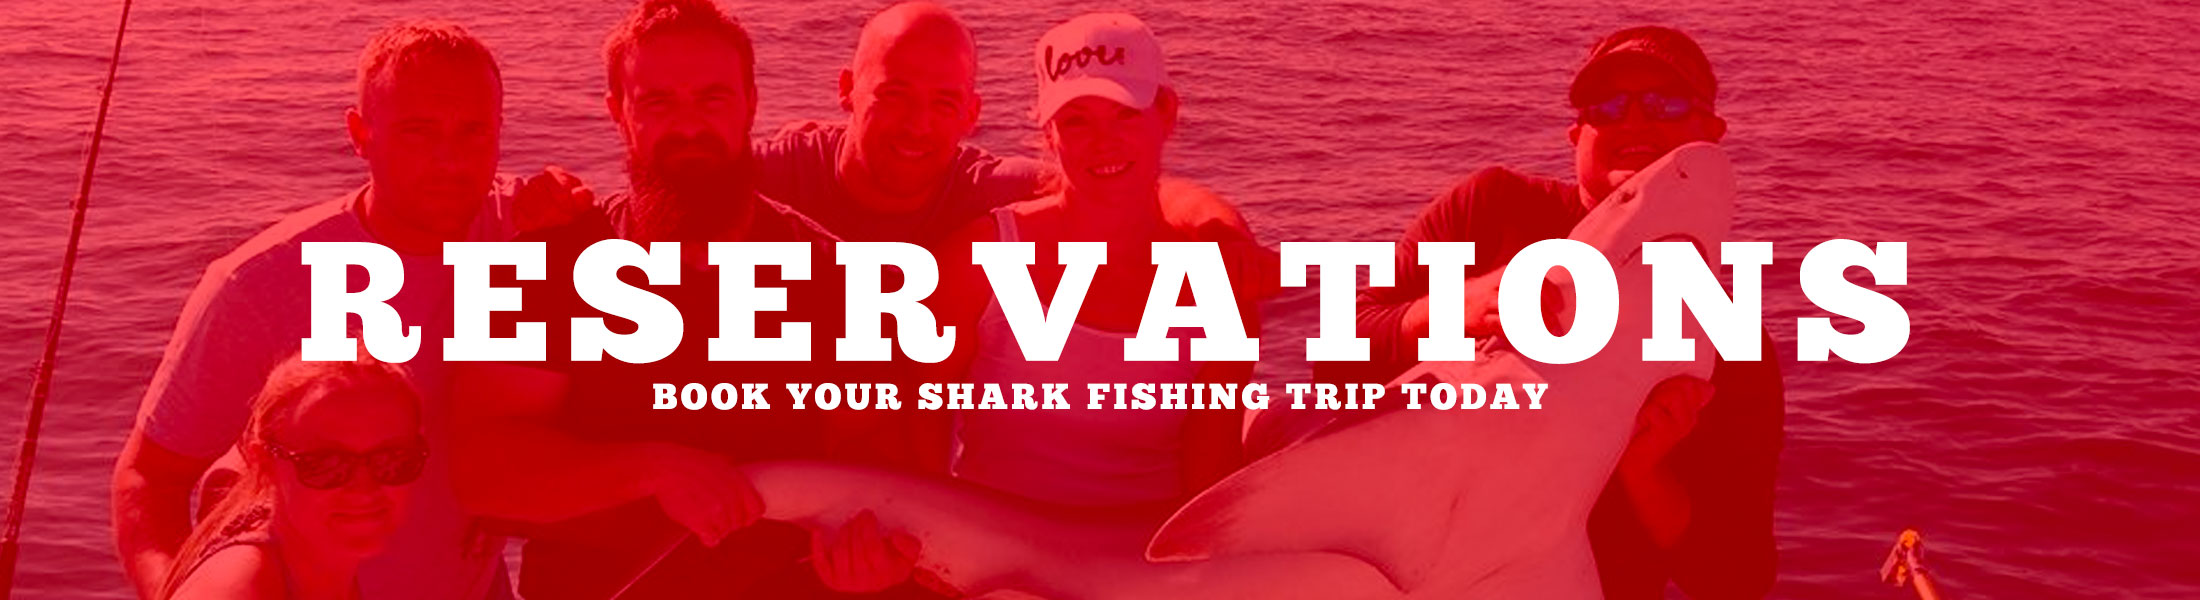 Make your reservation today for the shark fishing trip of a lifetime in Central Florida.